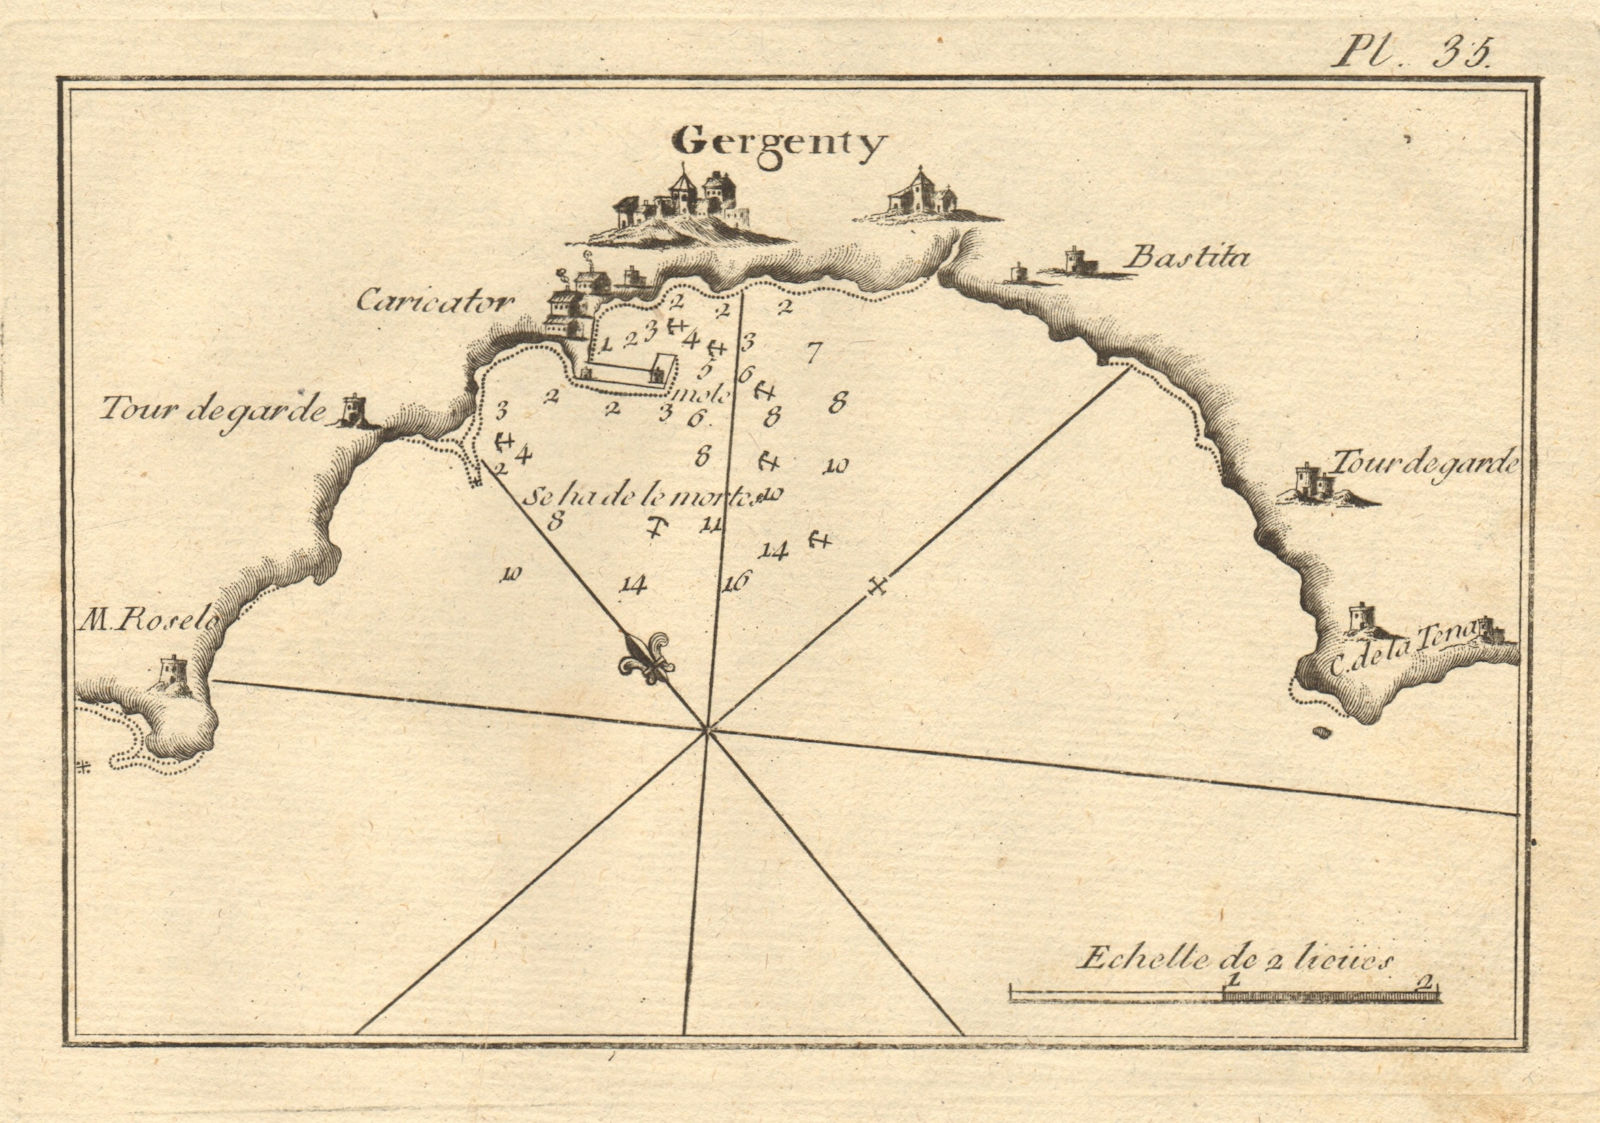 Associate Product Gergenty. Bay of Agrigento & Porto Empedocle. Sicily, Italy. ROUX 1804 old map